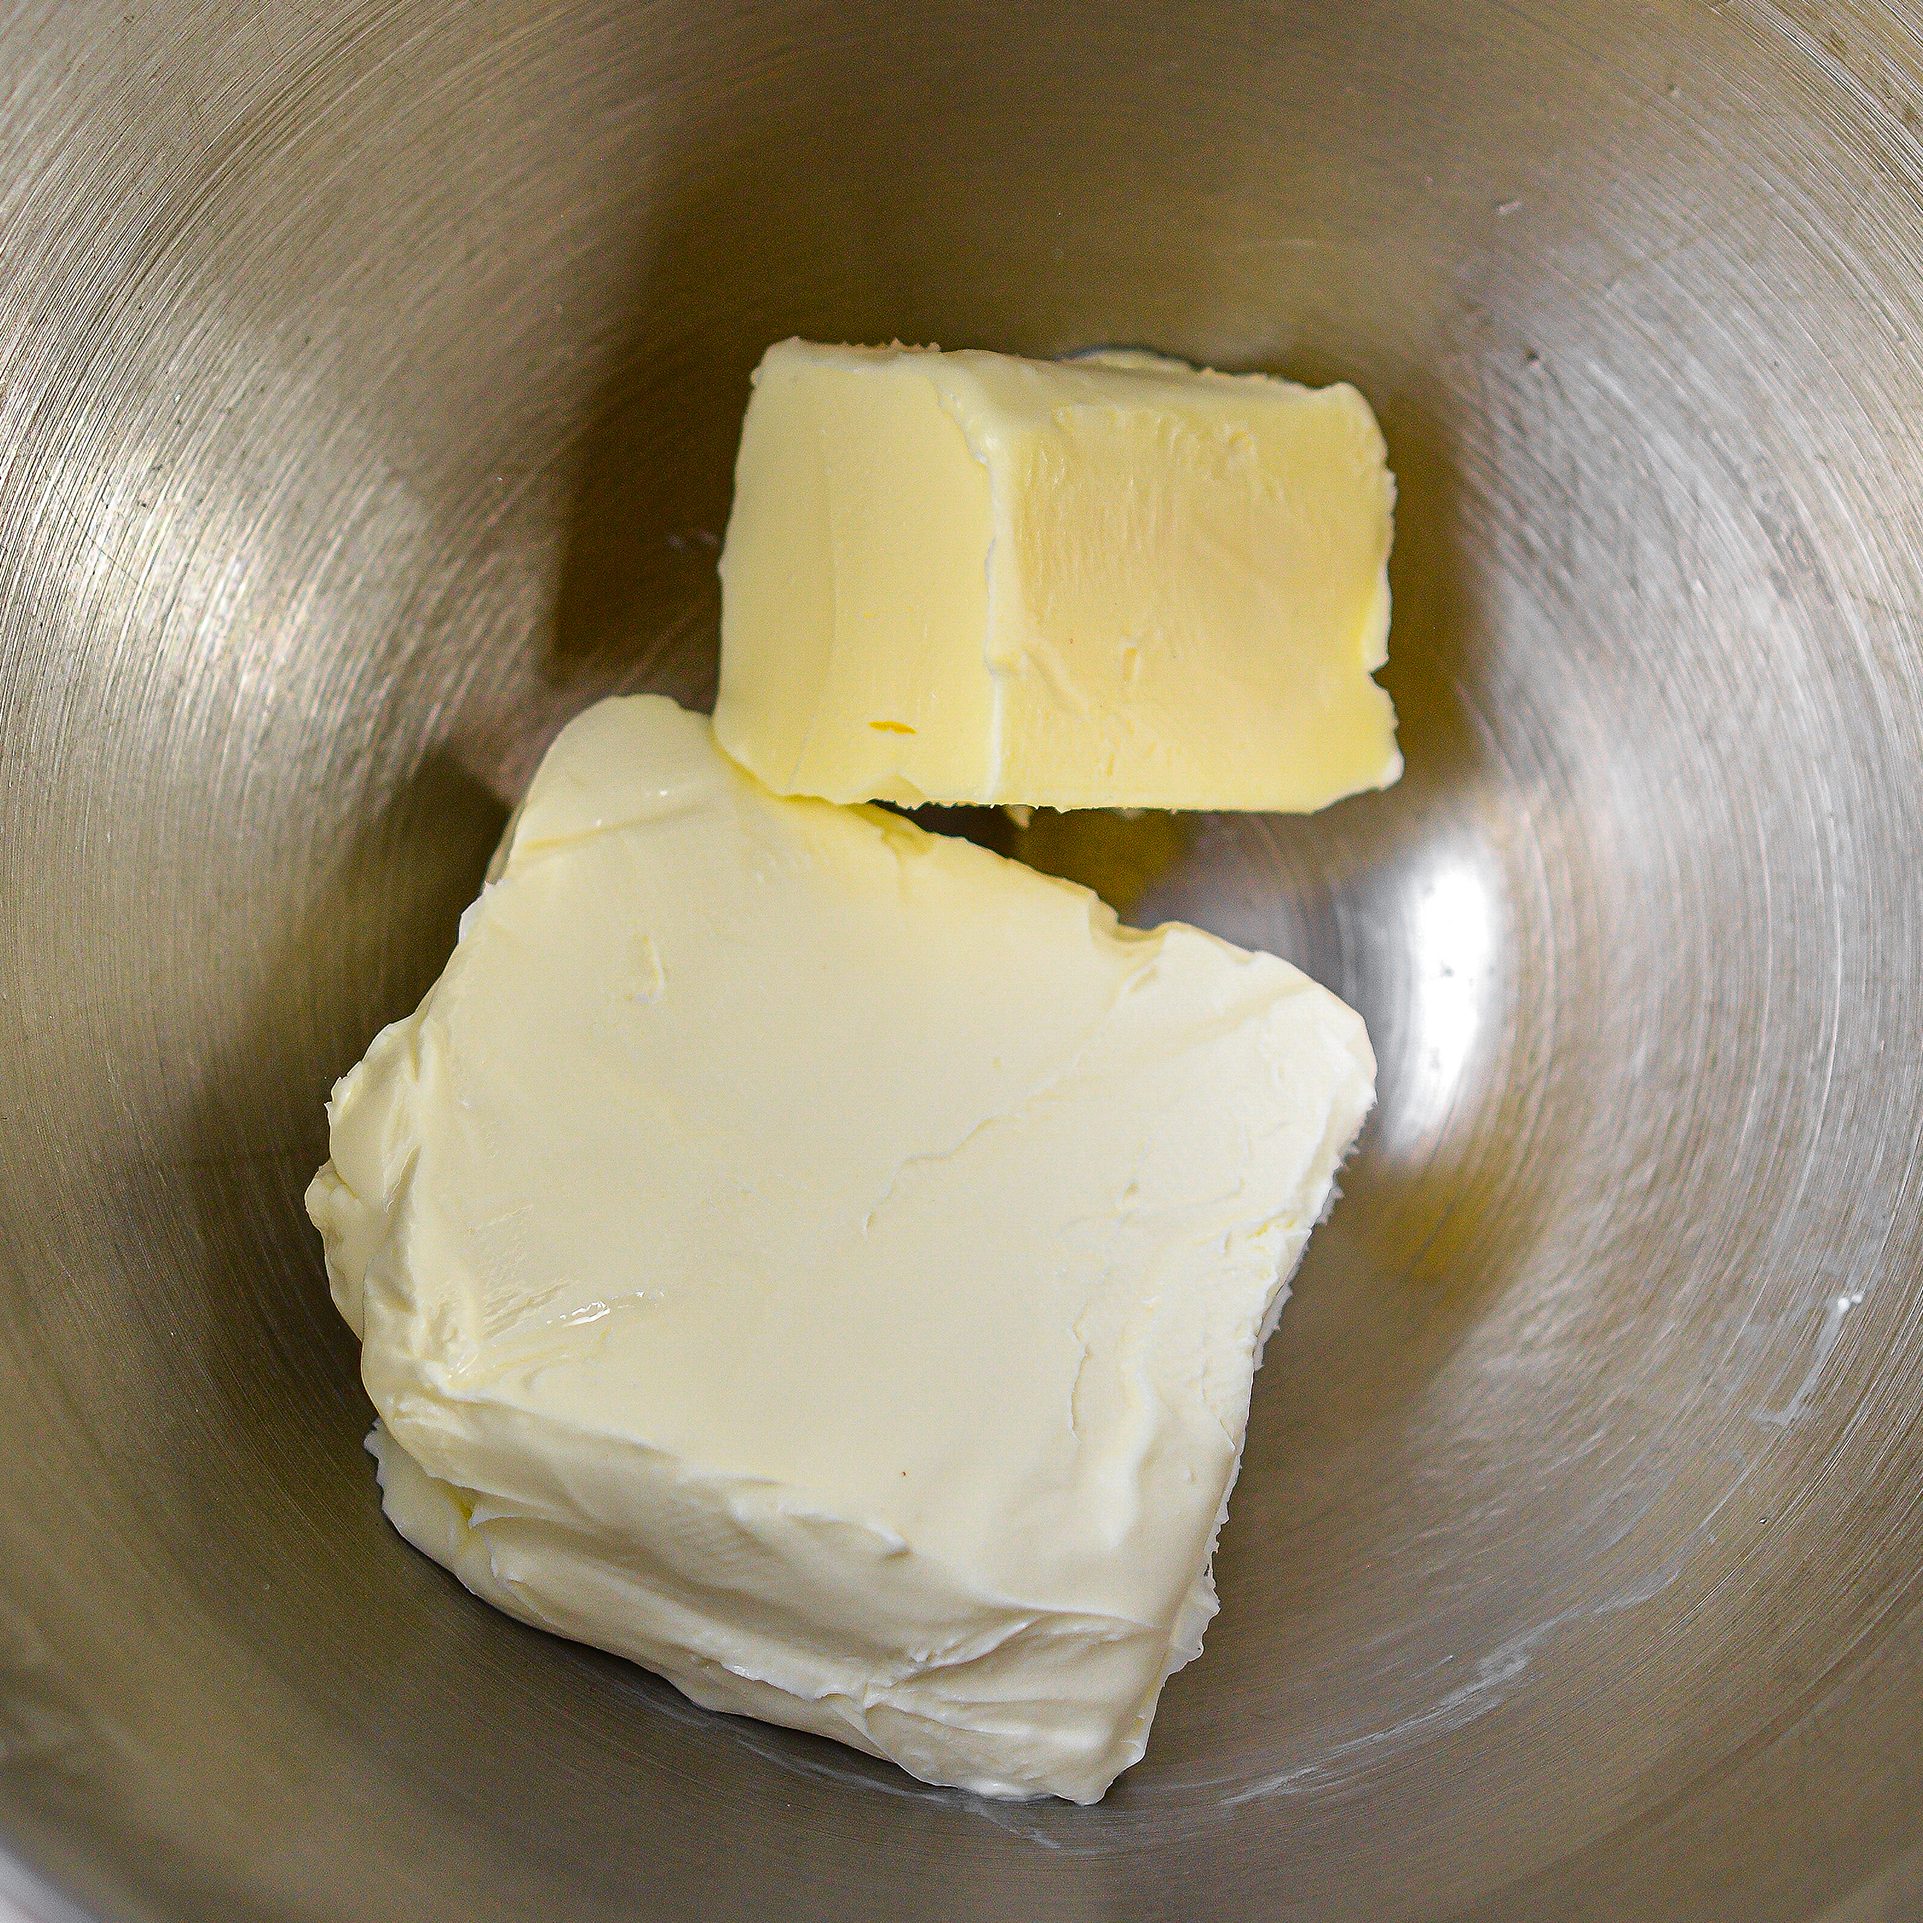 In a mixing bowl, combine the ingredients for the frosting until smooth and creamy.